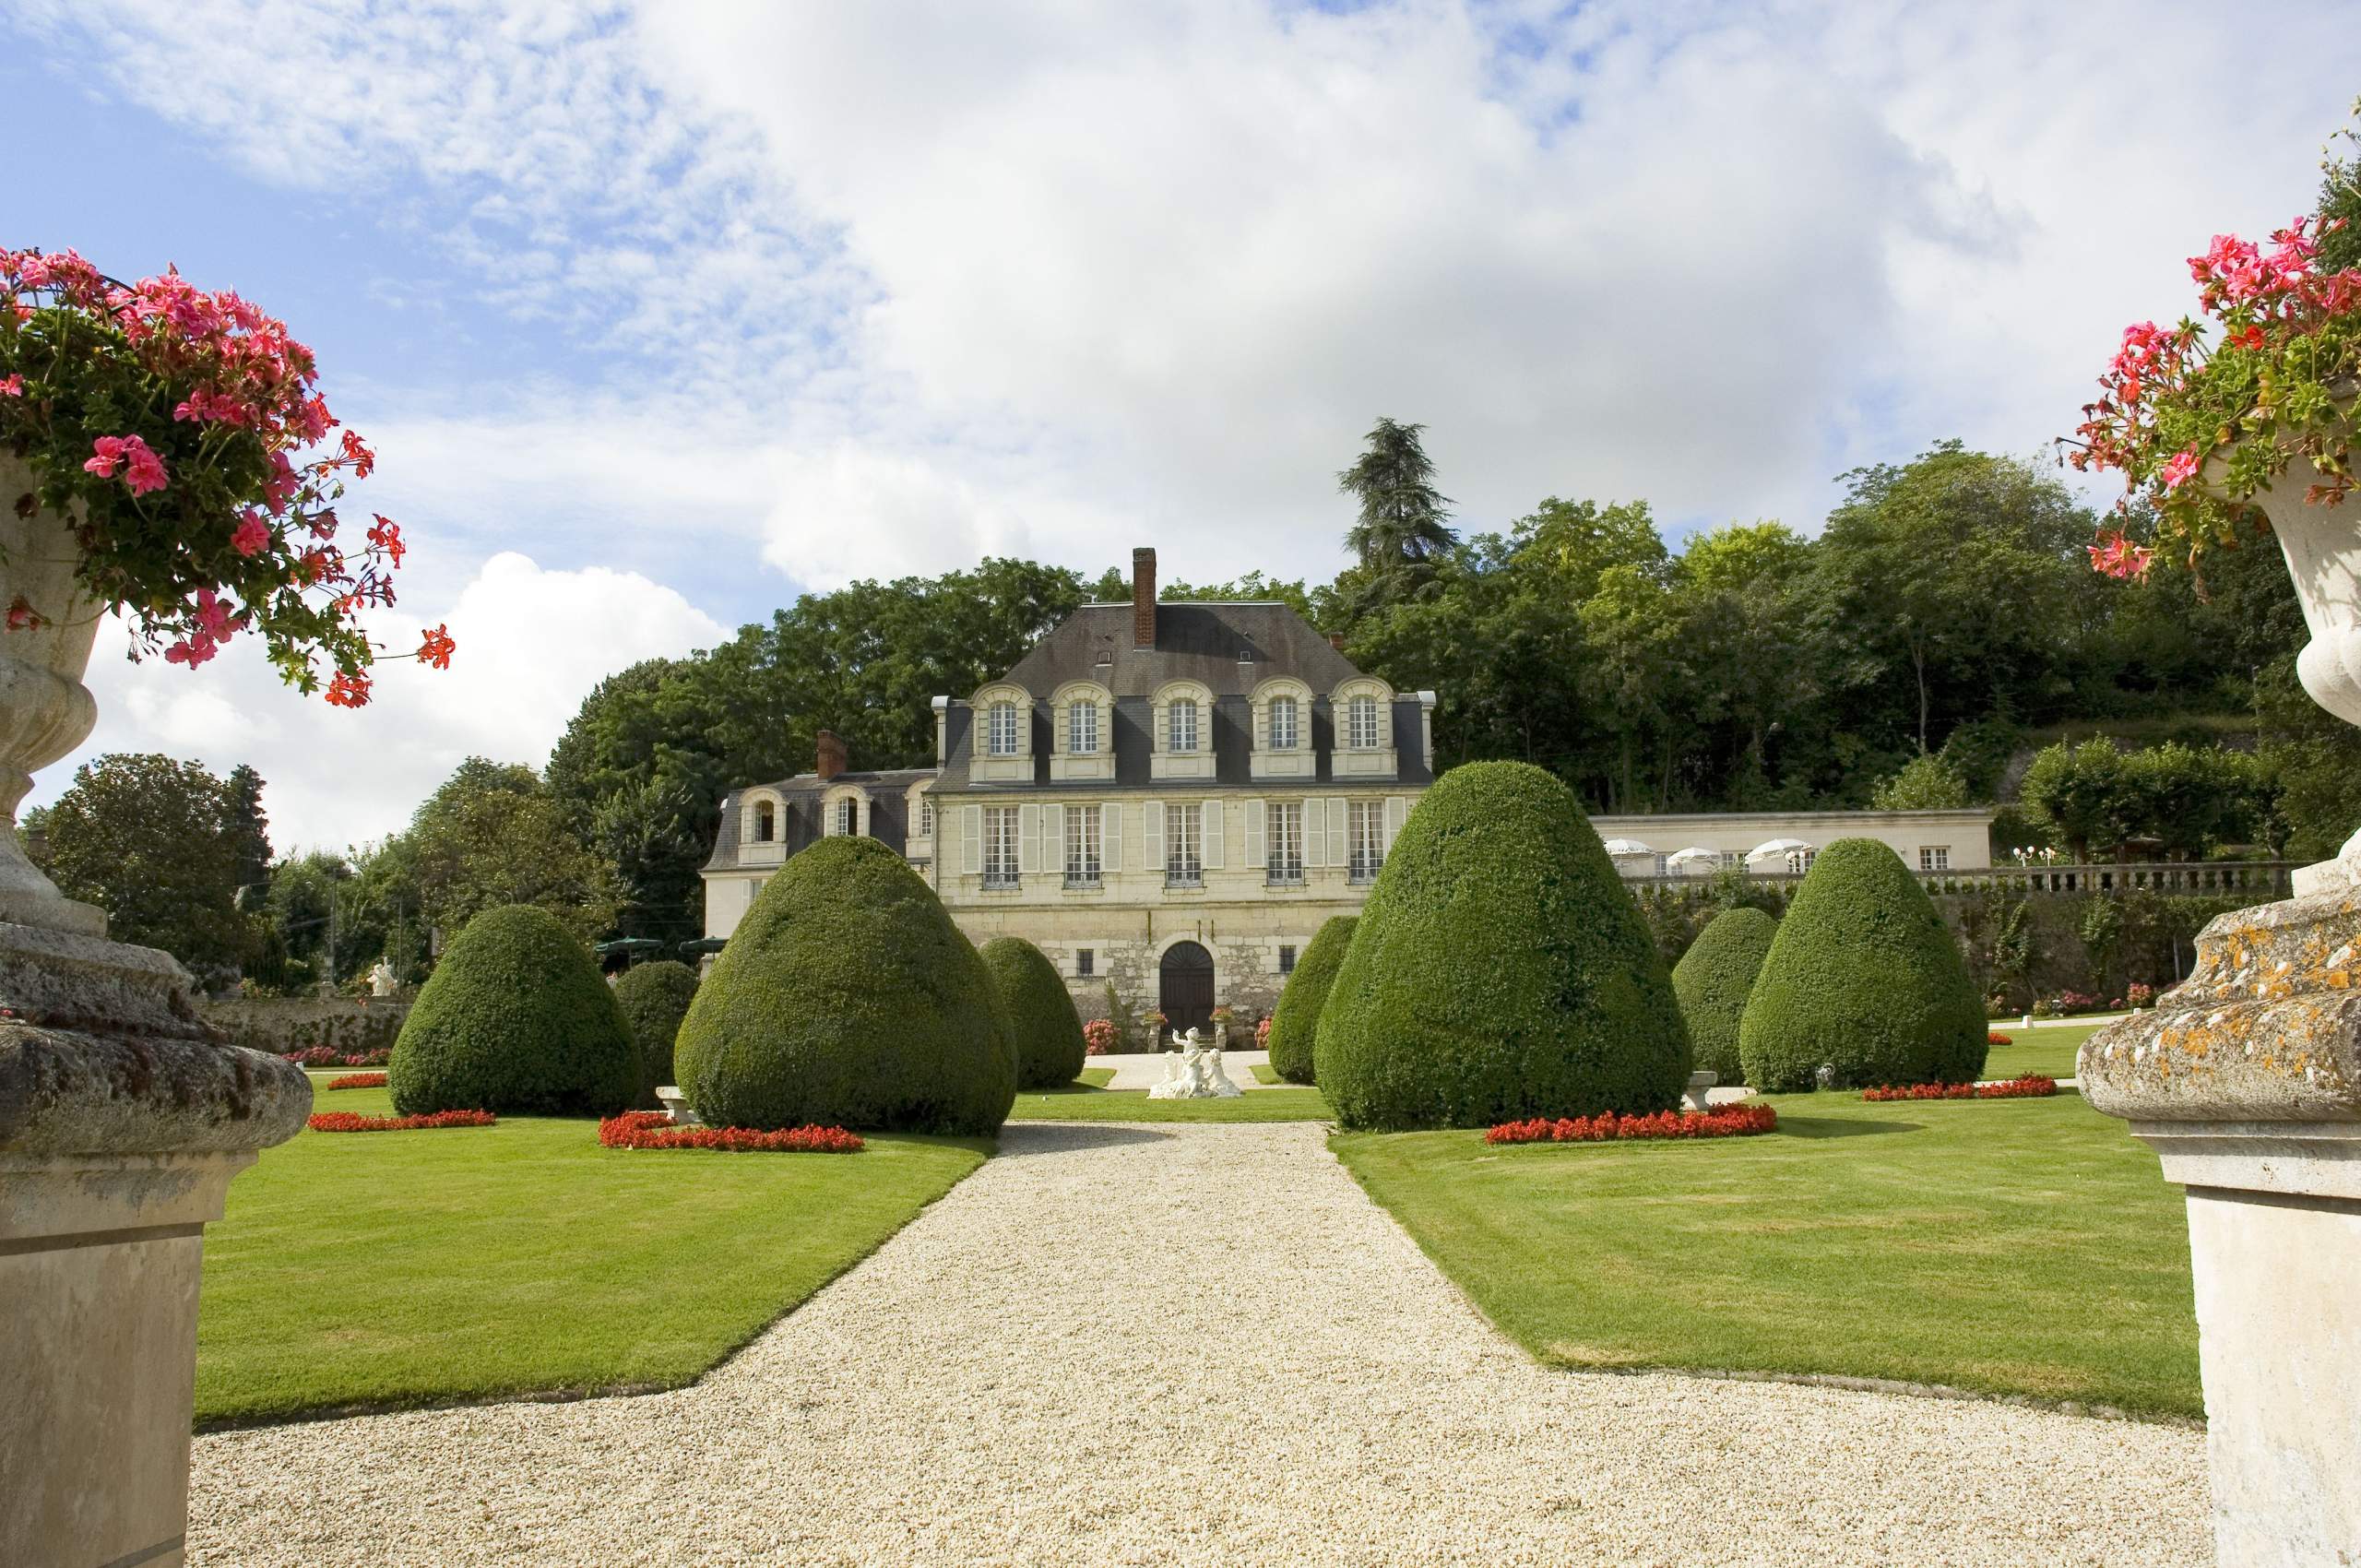 Outside of the Château de Beaulieu, Best rates Guaranteed on the official site